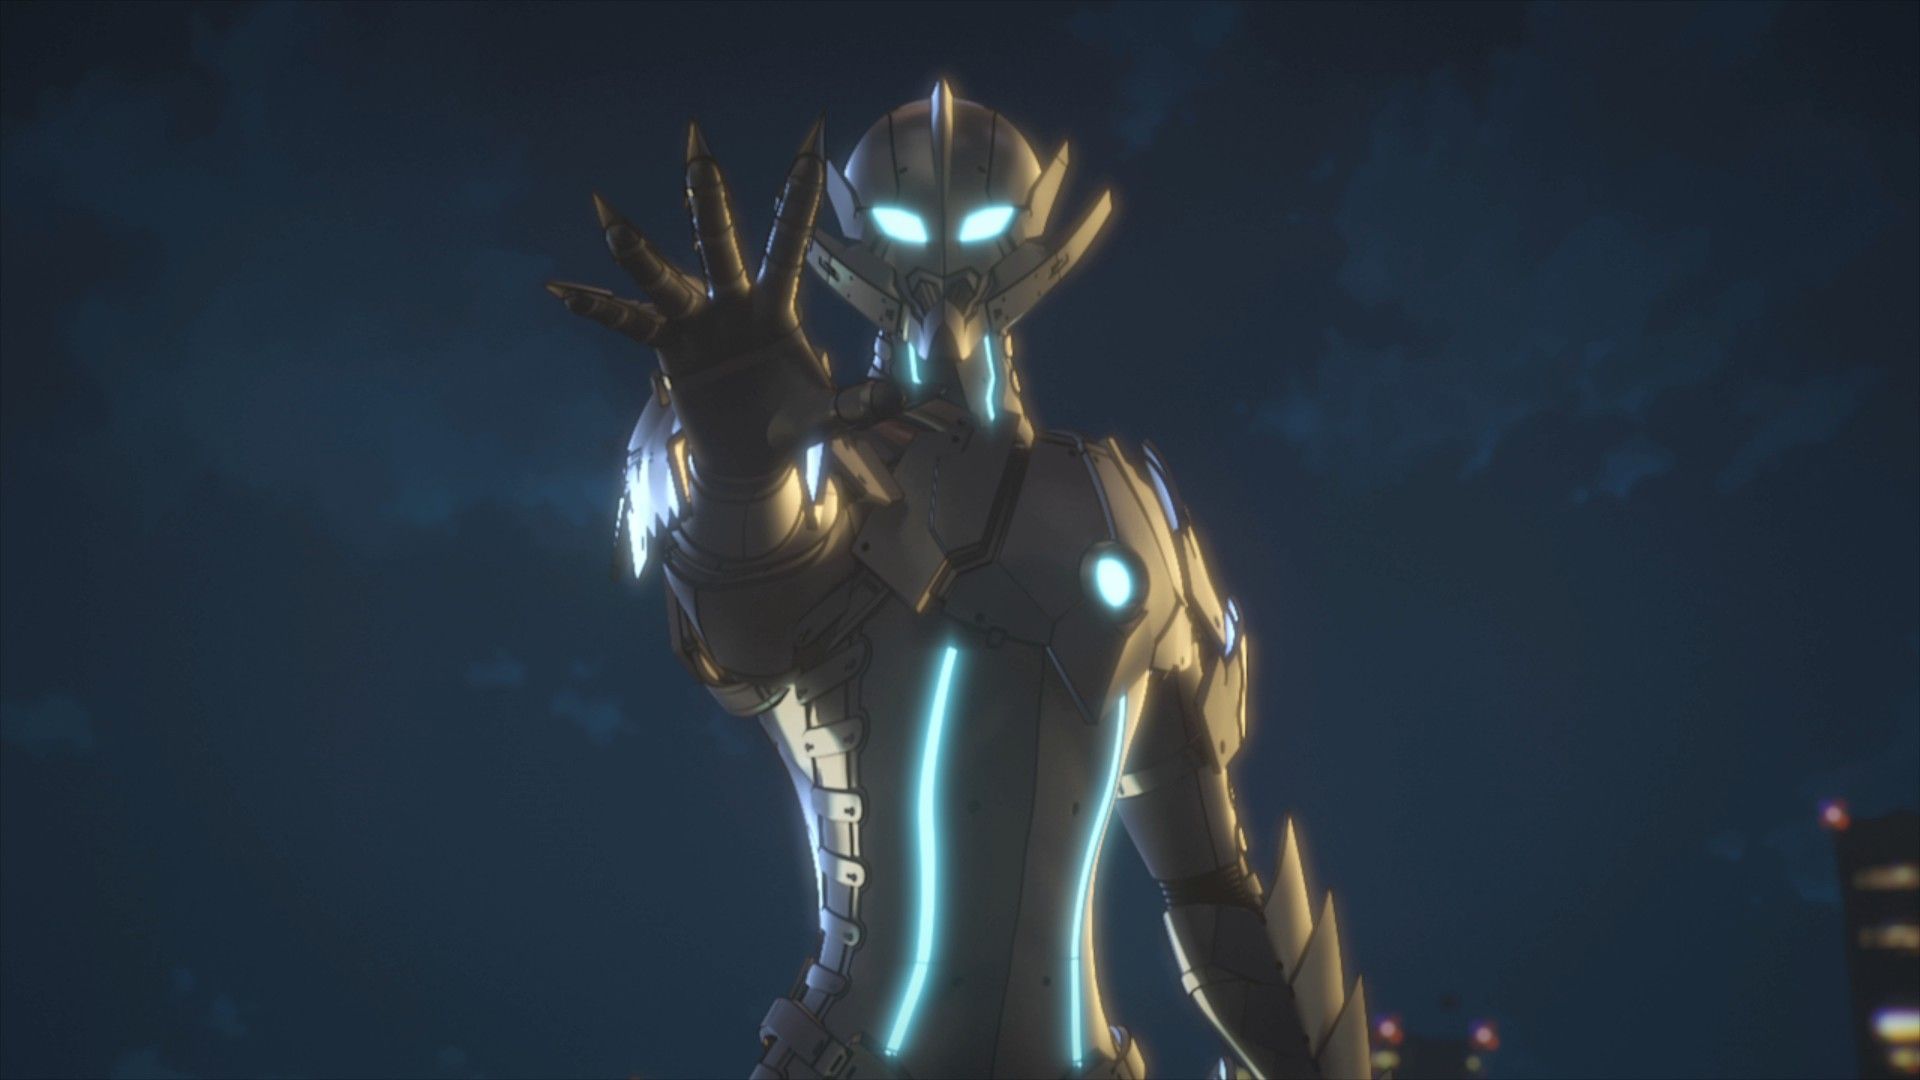 Seven, Ace, X, and More: Ultraman's Legacy